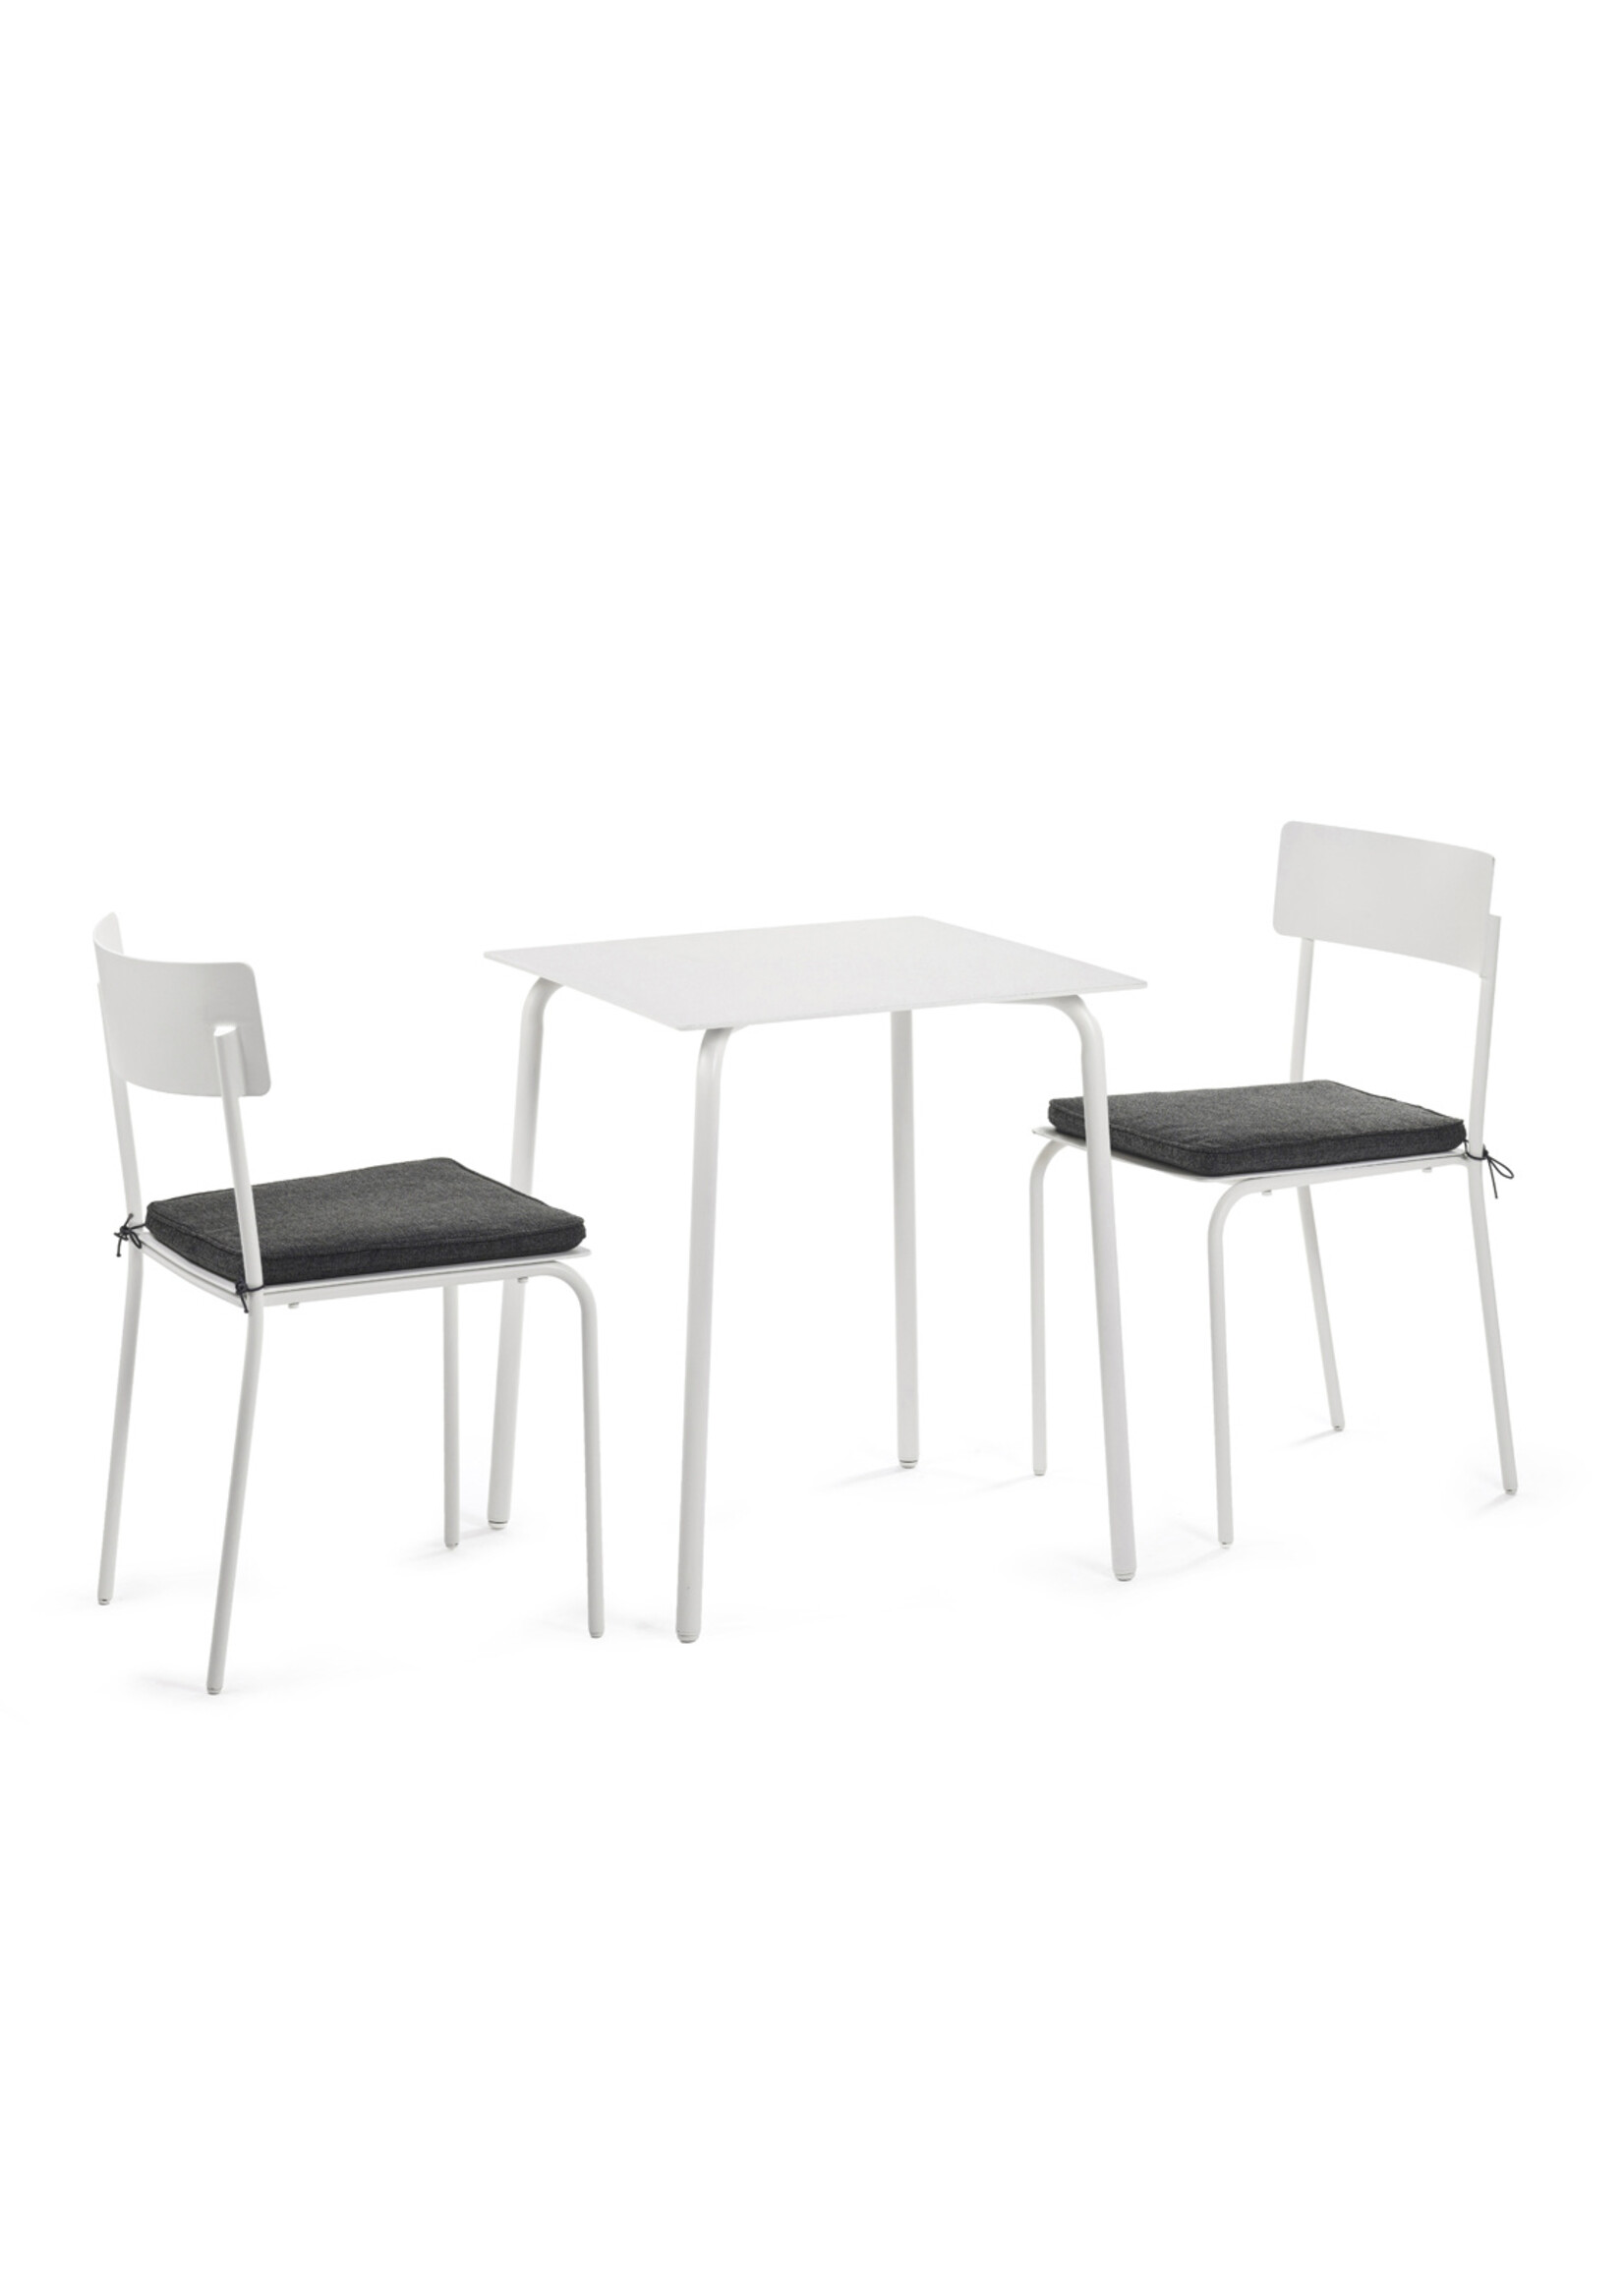 Serax August - Outdoor - Table - Sand - 65/65